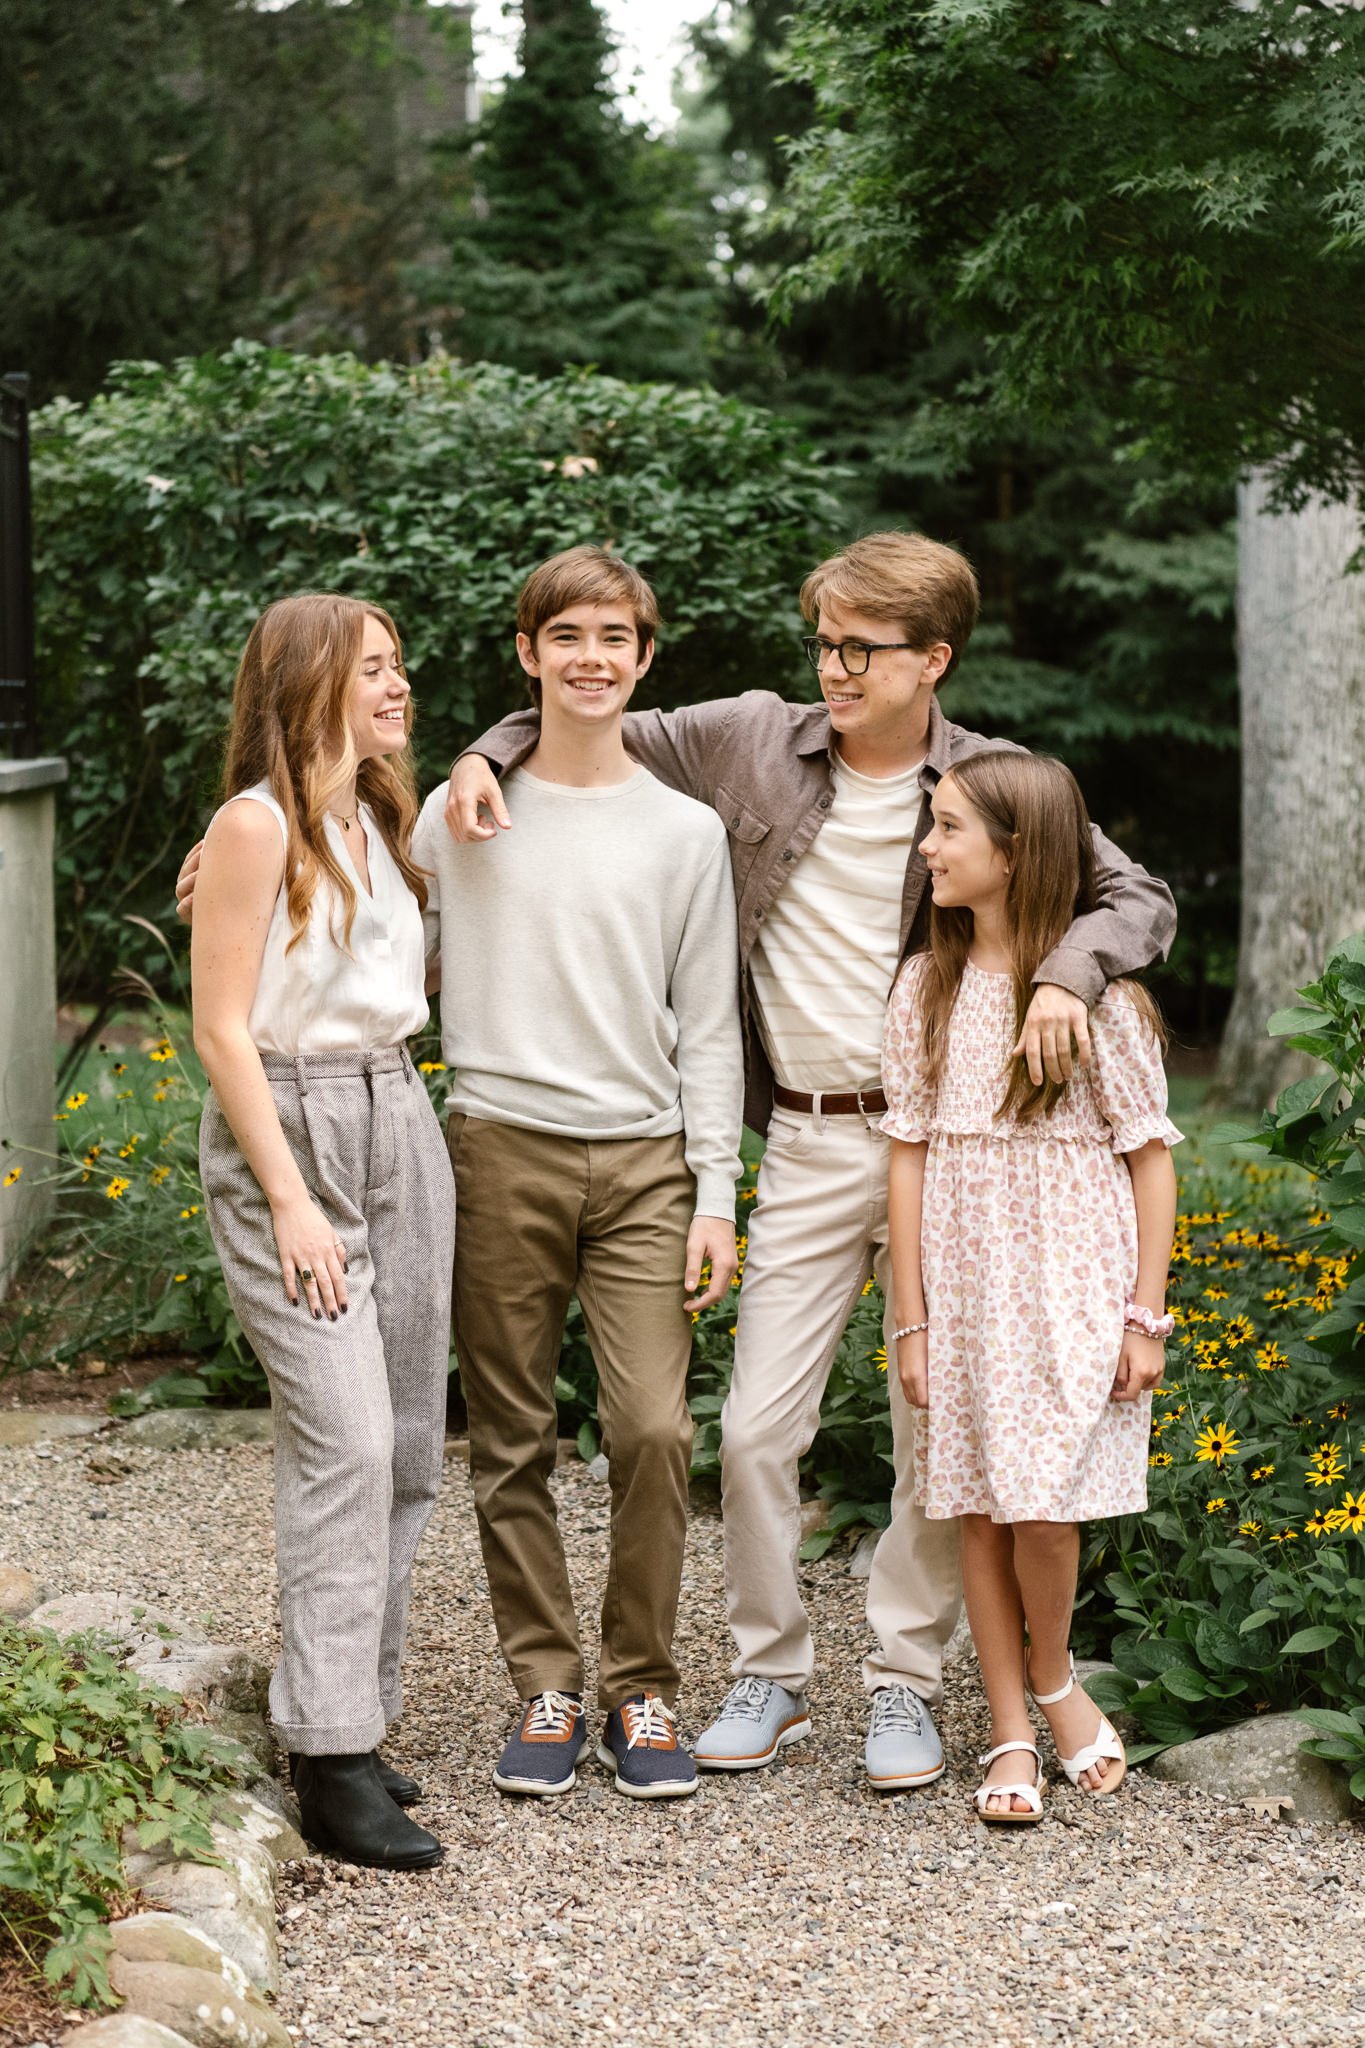  Candid senior portraits with siblings all enjoying time outdoors together by Nicole Hawkins Photography. family photographer NJ #NicoleHawkinsPhotography #NicoleHawkinsFamilyPortrait #NicoleHawkinsSenior #NJPortraits #siblingportrait 